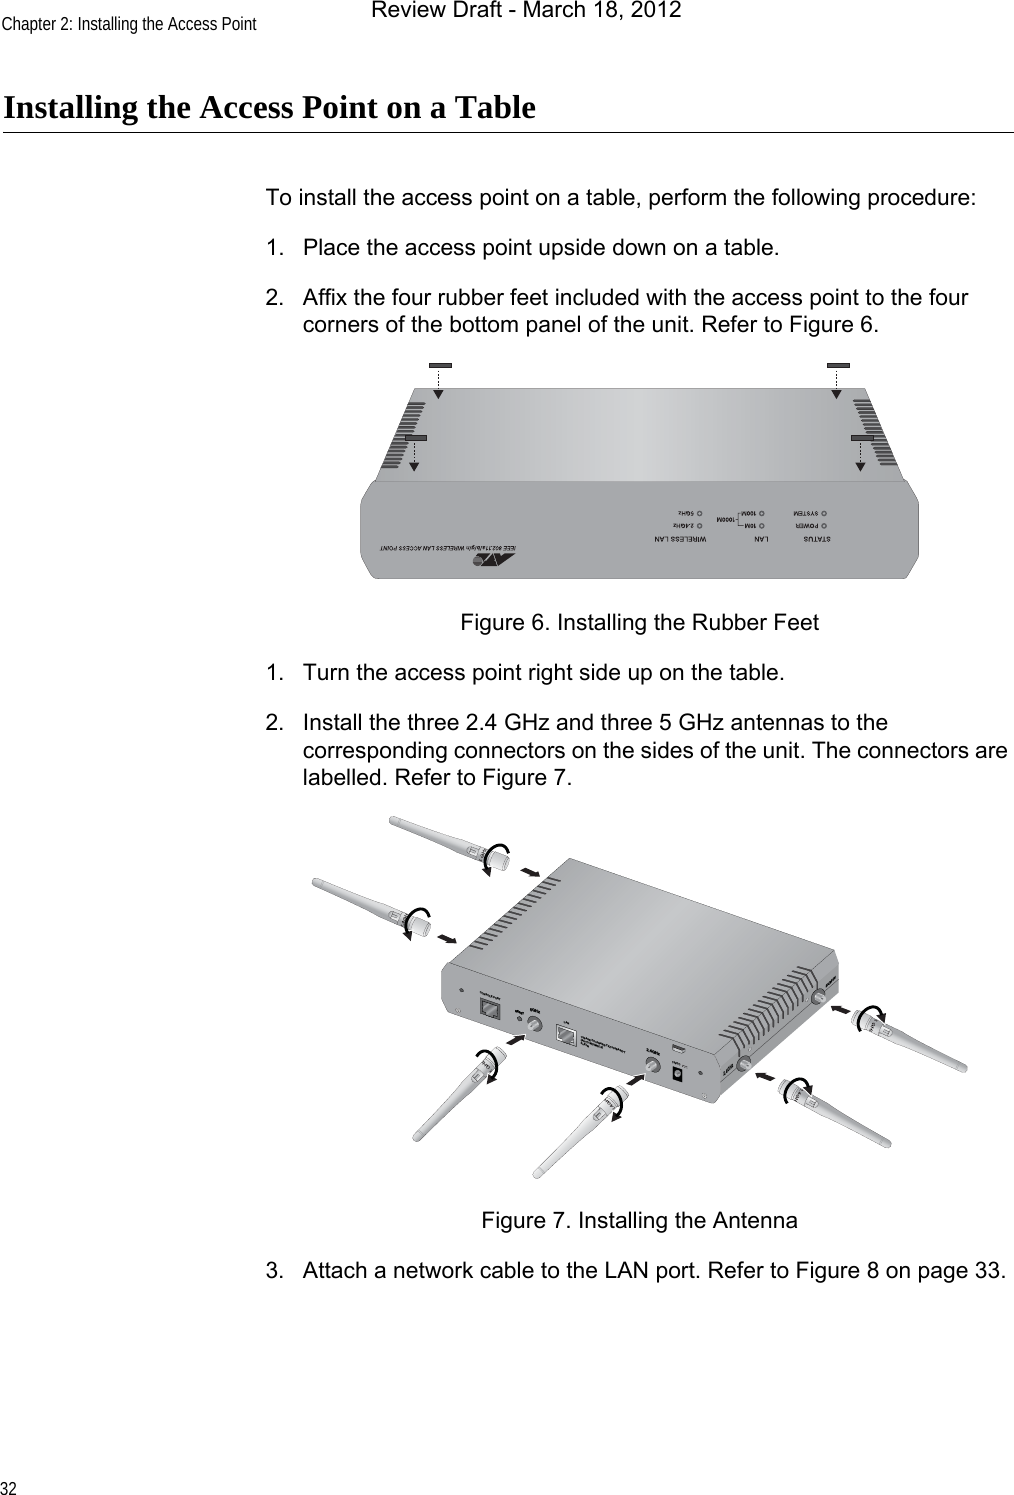 Chapter 2: Installing the Access Point32Installing the Access Point on a TableTo install the access point on a table, perform the following procedure:1. Place the access point upside down on a table.2. Affix the four rubber feet included with the access point to the four corners of the bottom panel of the unit. Refer to Figure 6.Figure 6. Installing the Rubber Feet1. Turn the access point right side up on the table.2. Install the three 2.4 GHz and three 5 GHz antennas to the corresponding connectors on the sides of the unit. The connectors are labelled. Refer to Figure 7.Figure 7. Installing the Antenna3. Attach a network cable to the LAN port. Refer to Figure 8 on page 33.CONSOLE PORTRESET5GHzRESET2.4GHzLAN10BASE-T/100BASE-TX/1000BASE-T(AUTO MDI/MDI-X)PoE IN12VDC2.4GHz5GHzReview Draft - March 18, 2012